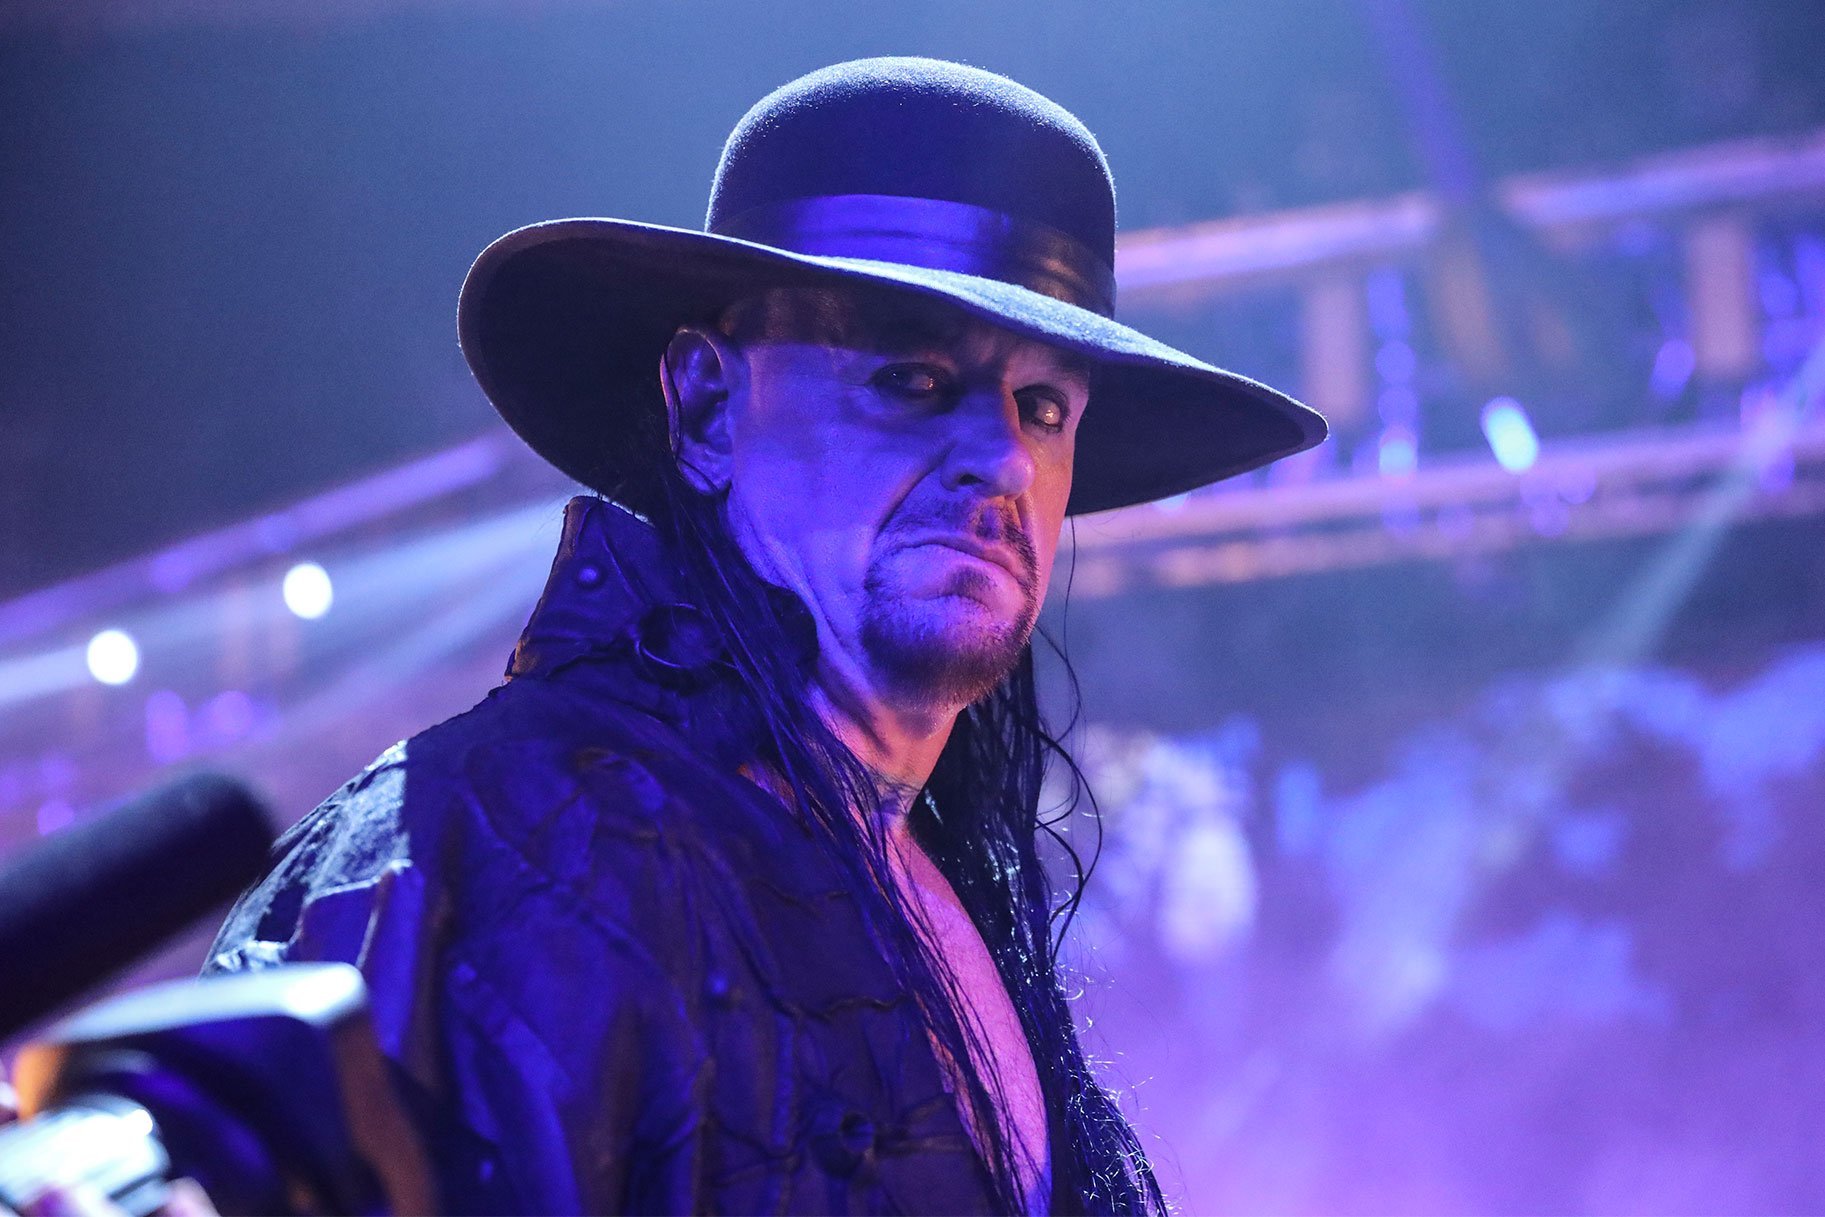 The Undertaker: My Preference Was Chasing Titles Rather Than Holding Them